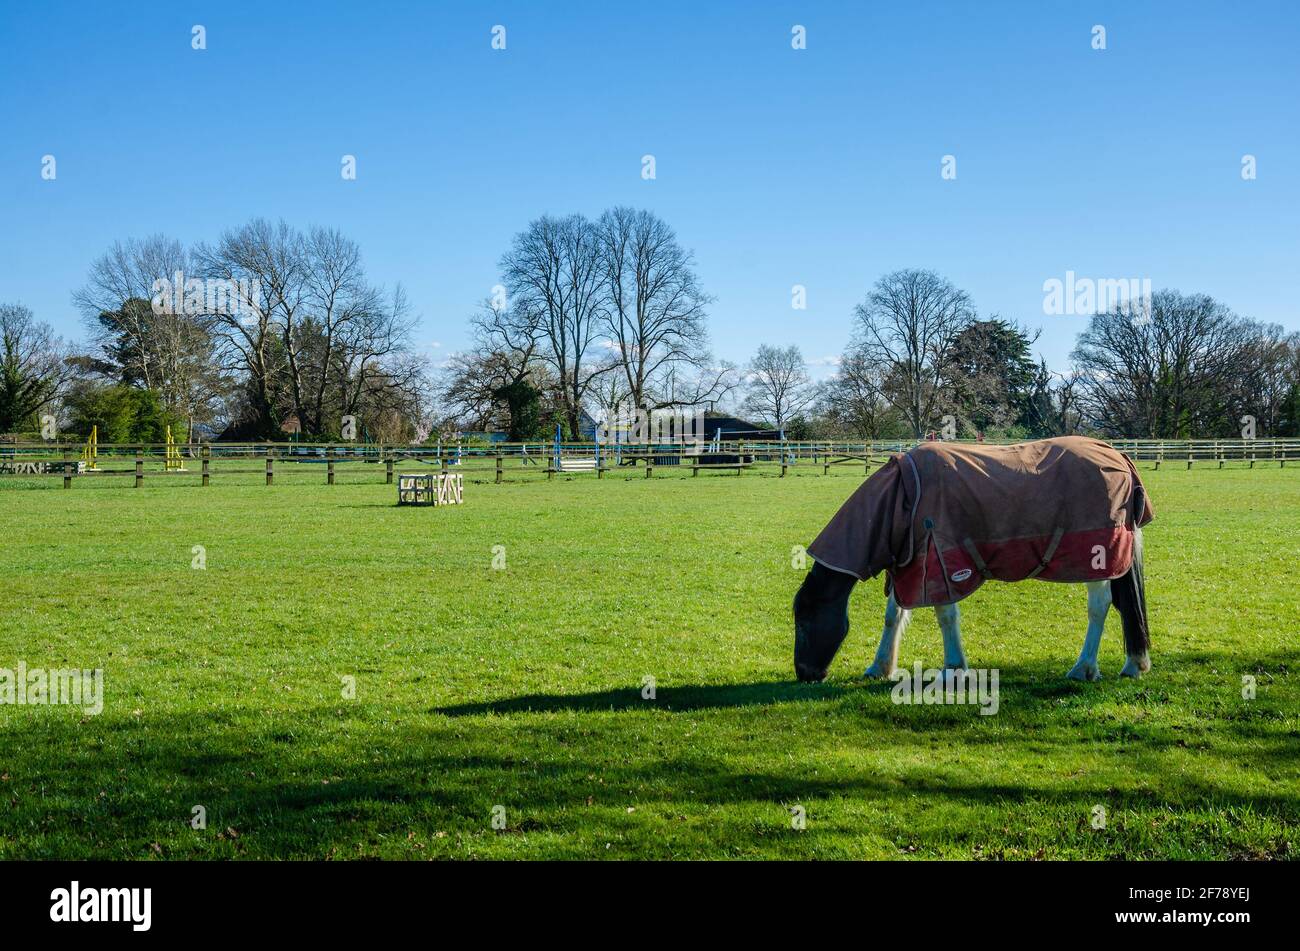 A horse grazing in a lush green field beneath a blue sky in springtime. Stock Photo